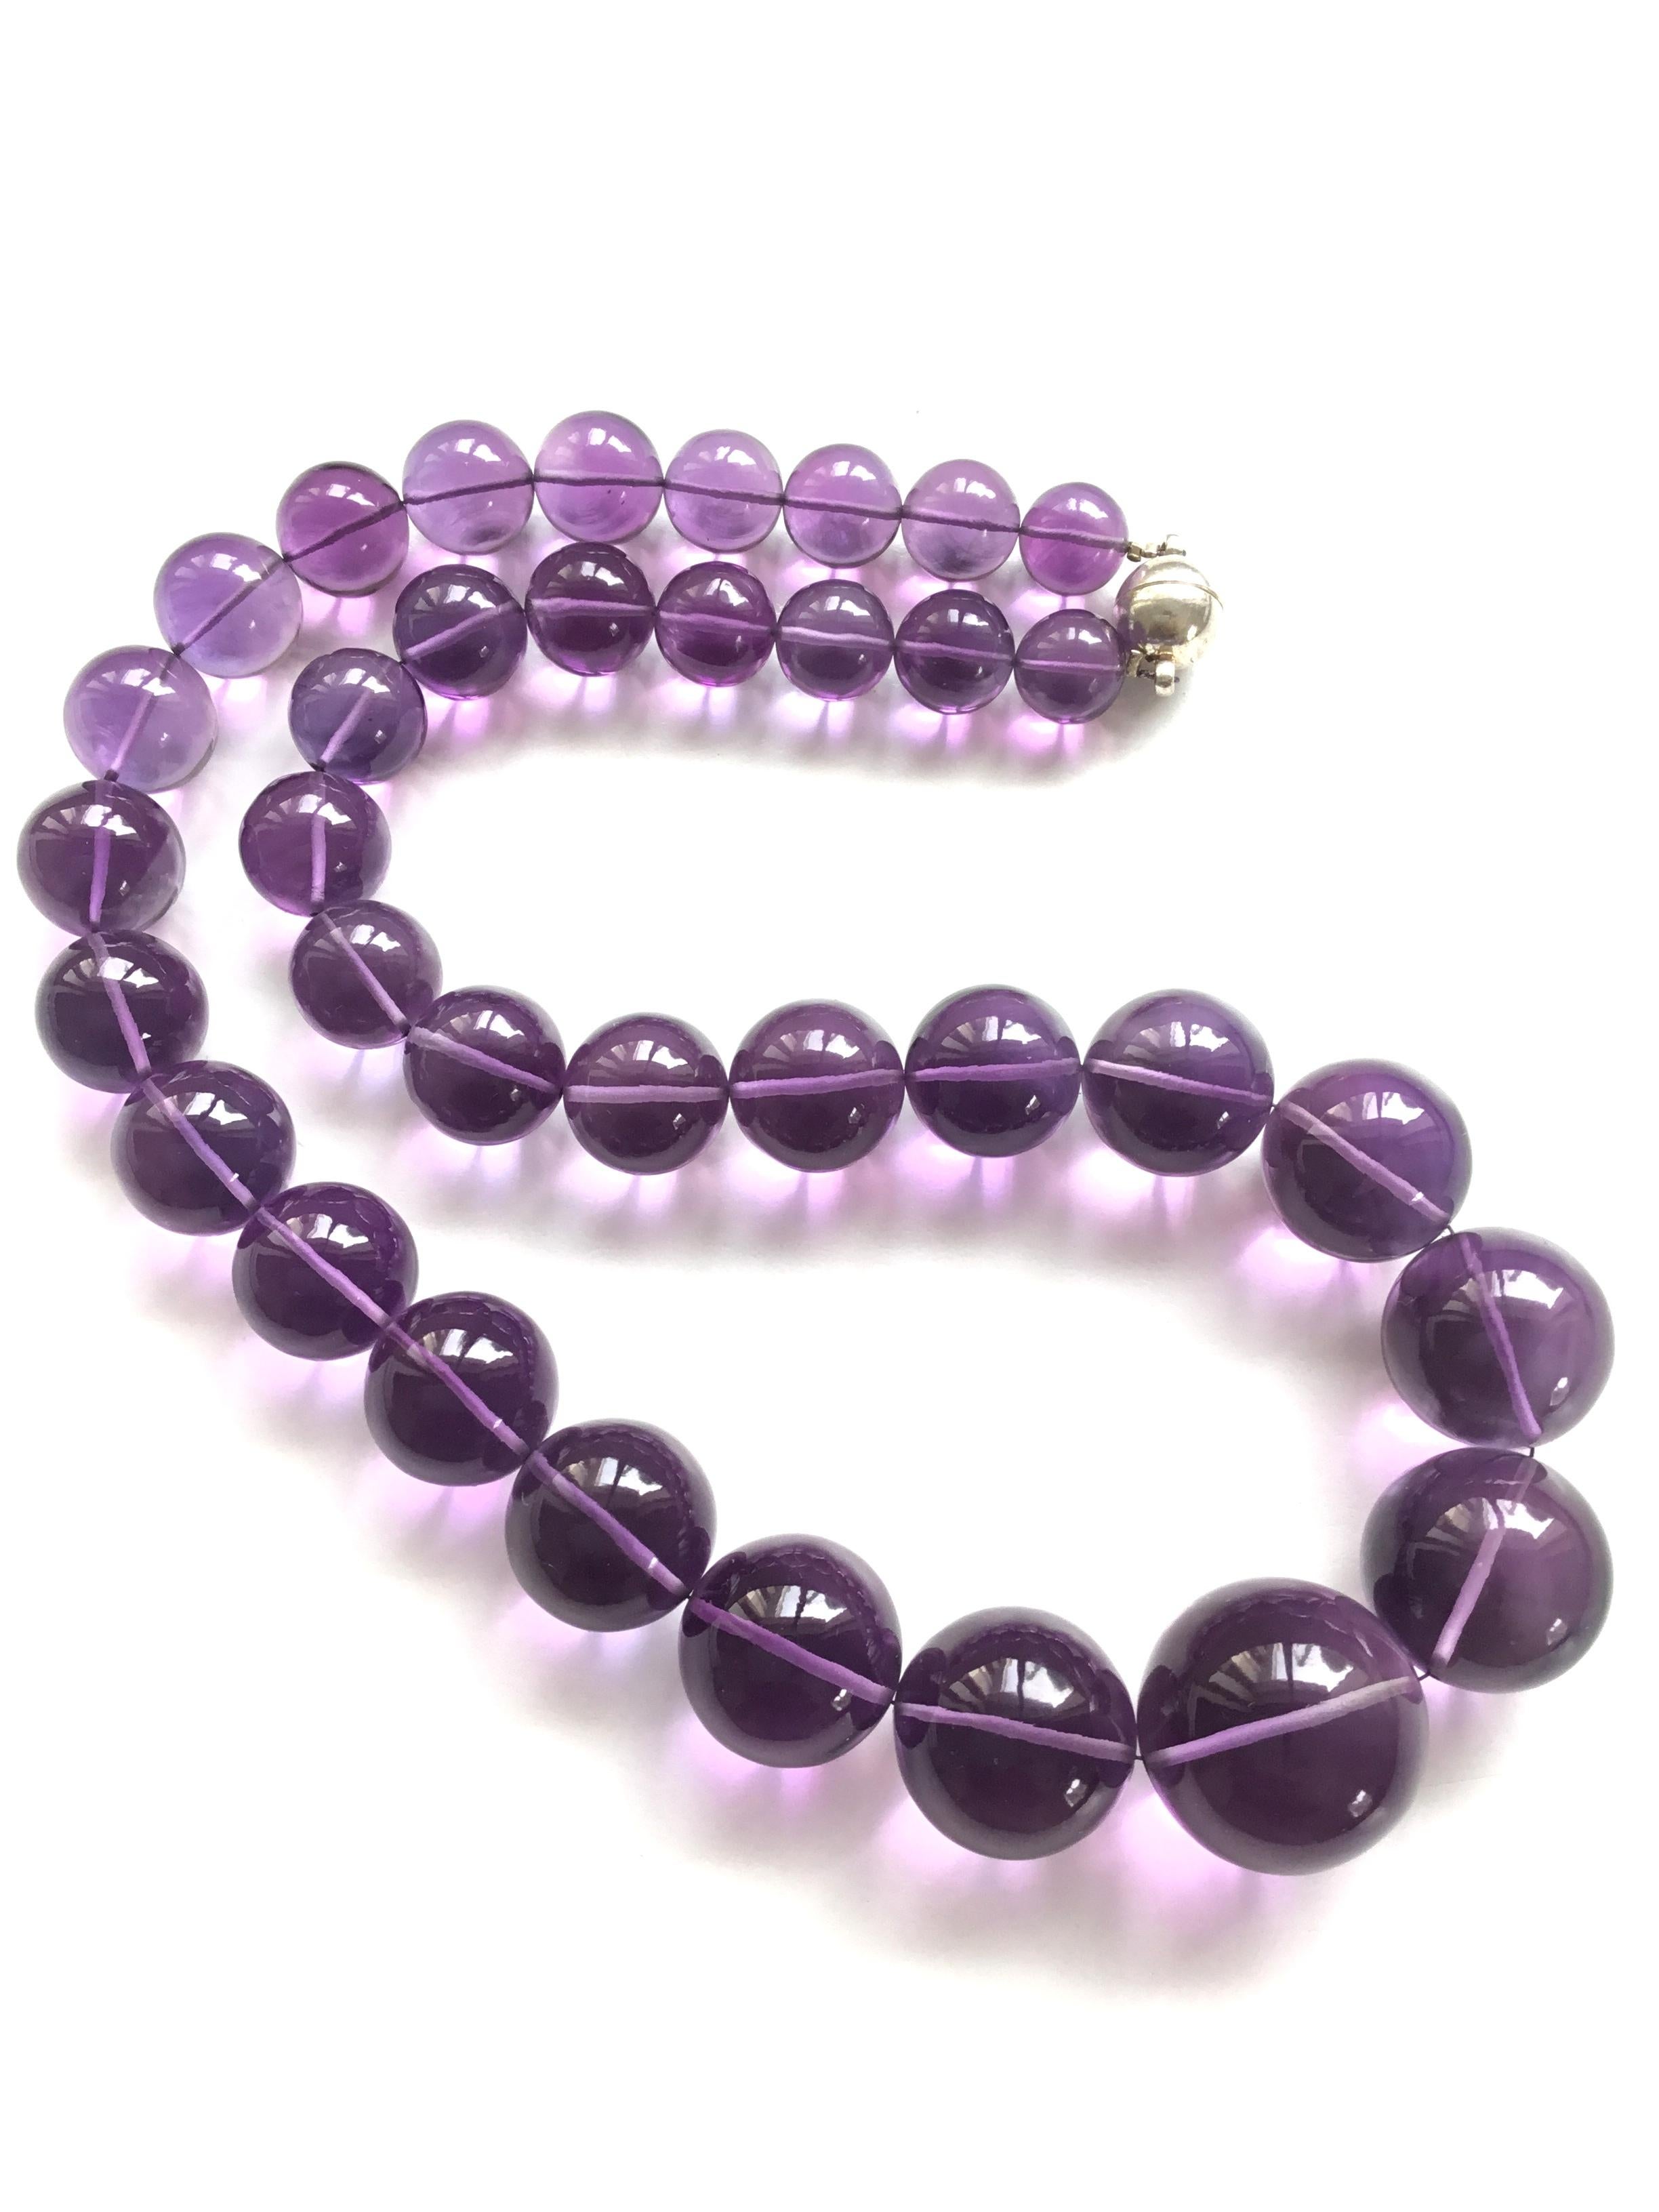 Bead Top Quality Amethyst Balls Necklace Loupe Clean For Sale